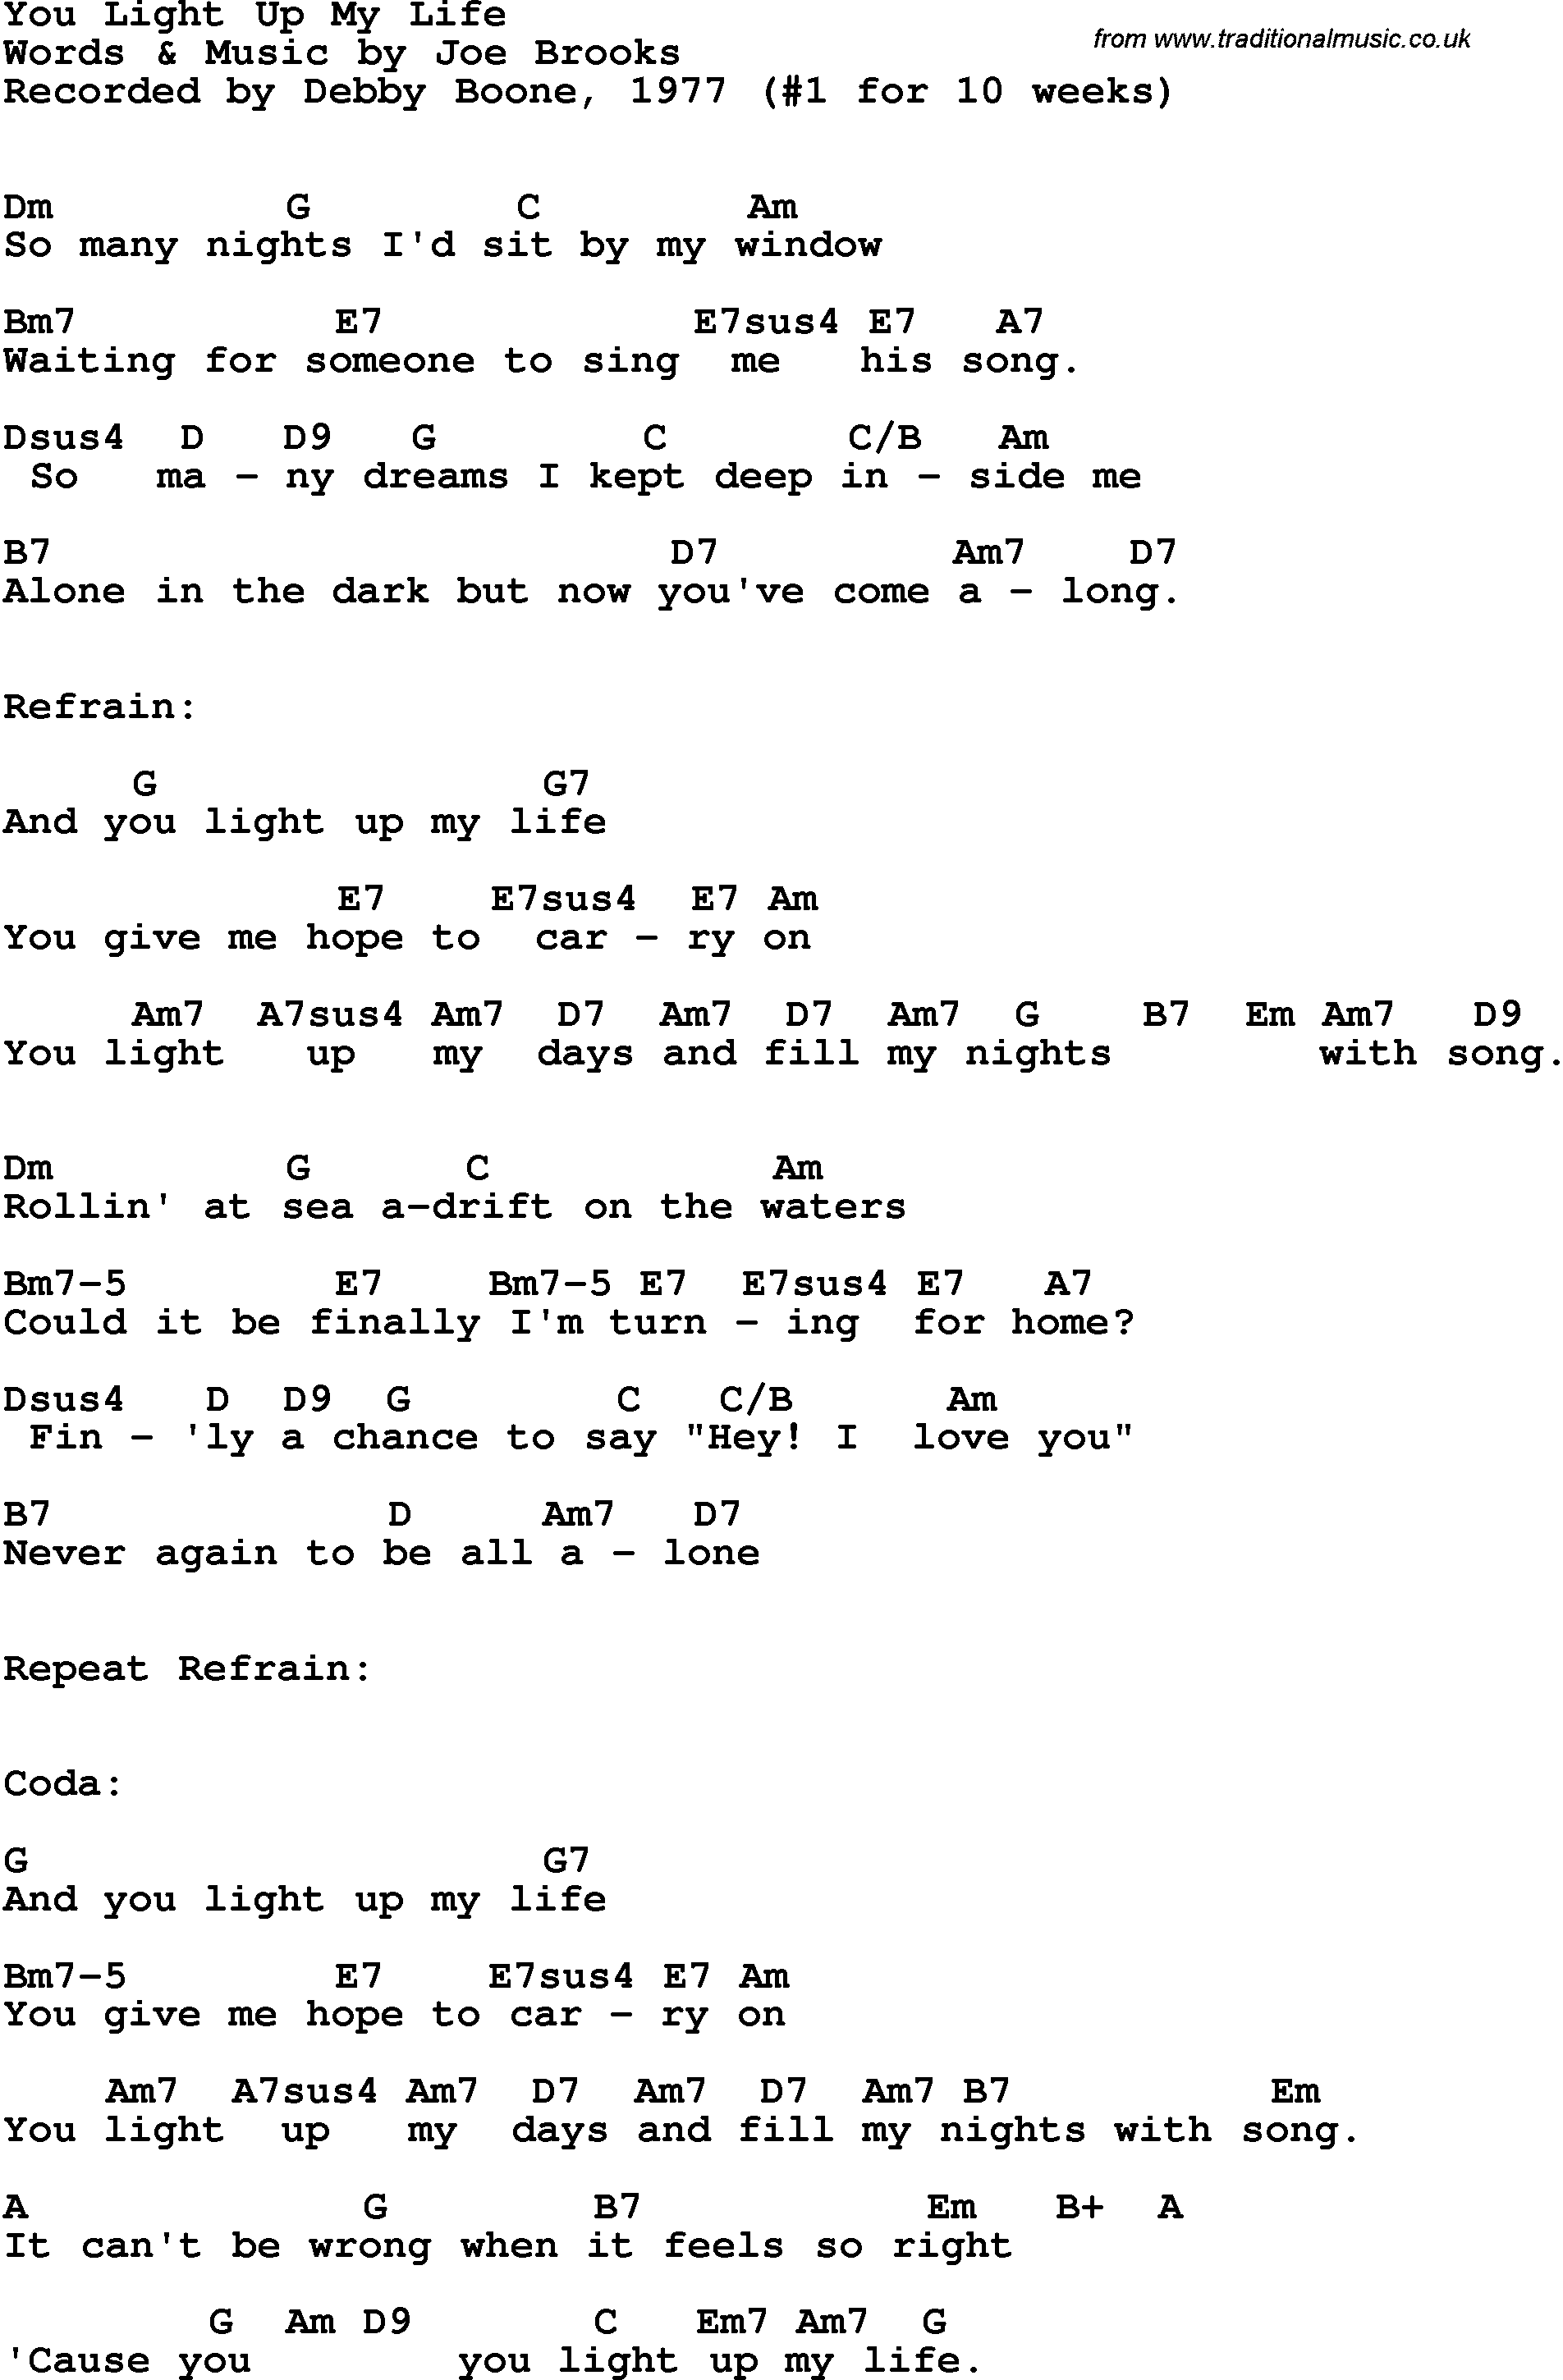 Song Lyrics with guitar chords for You Light Up My Life - Debby Boone, 1977